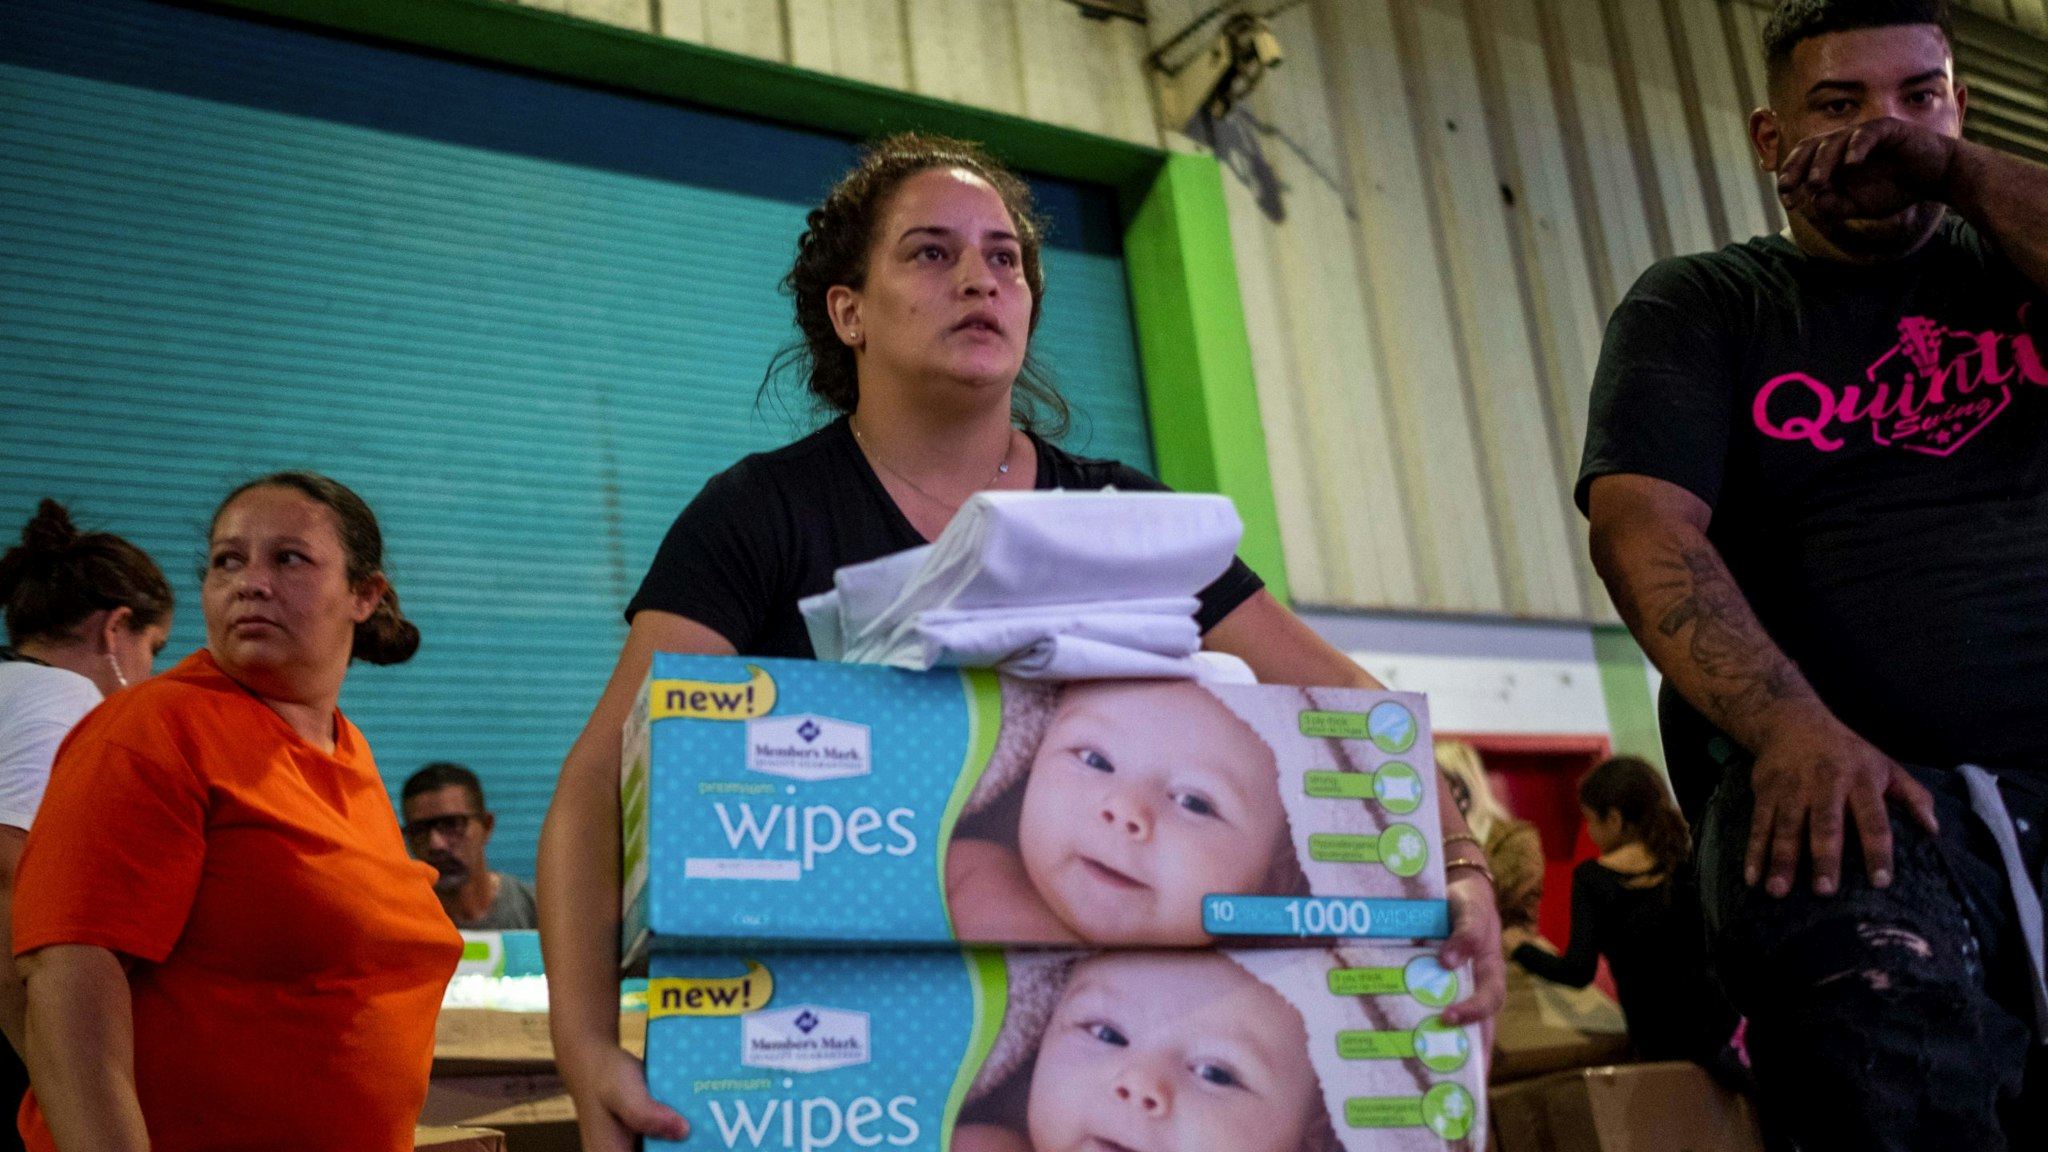 A woman carries boxes of baby wipes she removed from a warehouse filled with supplies, including thousands of cases of water, believed to have been from when Hurricane Maria struck the island in 2017 in Ponce, Puerto Rico on January 18, 2020, after a powerful earthquake hit the island. - President Donald Trump on January 16 freed up emergency aid for Puerto Rico's recovery from a January 7 earthquake that caused widespread disruption and damage on the island. Trump's declaration of a major disaster in Puerto Rico makes federal funding available for repairs, temporary housing and low-cost loans "to help individuals and business owners recover from the effects of the disaster," the White House said. (Photo by Ricardo ARDUENGO / AFP) (Photo by RICARDO ARDUENGO/AFP via Getty Images)